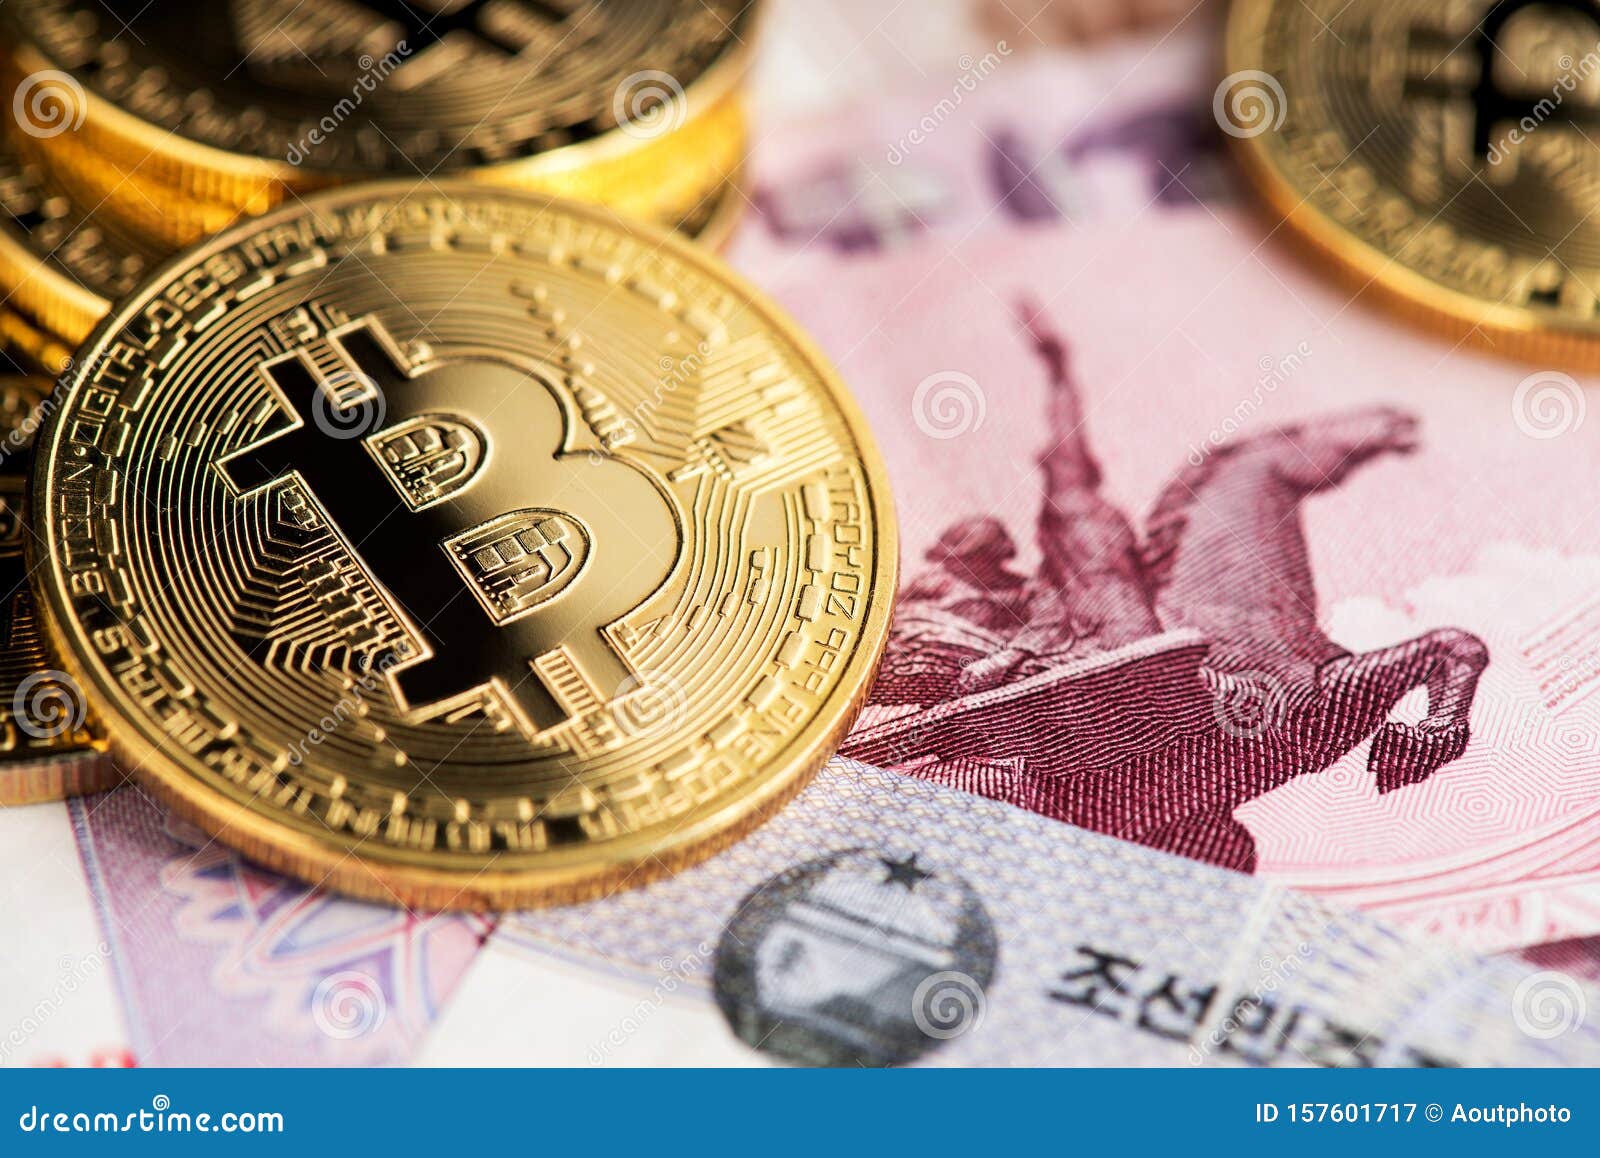 Bitcoin Cryptocurrency On North Korean Won Close Up Image. Stock Image ...